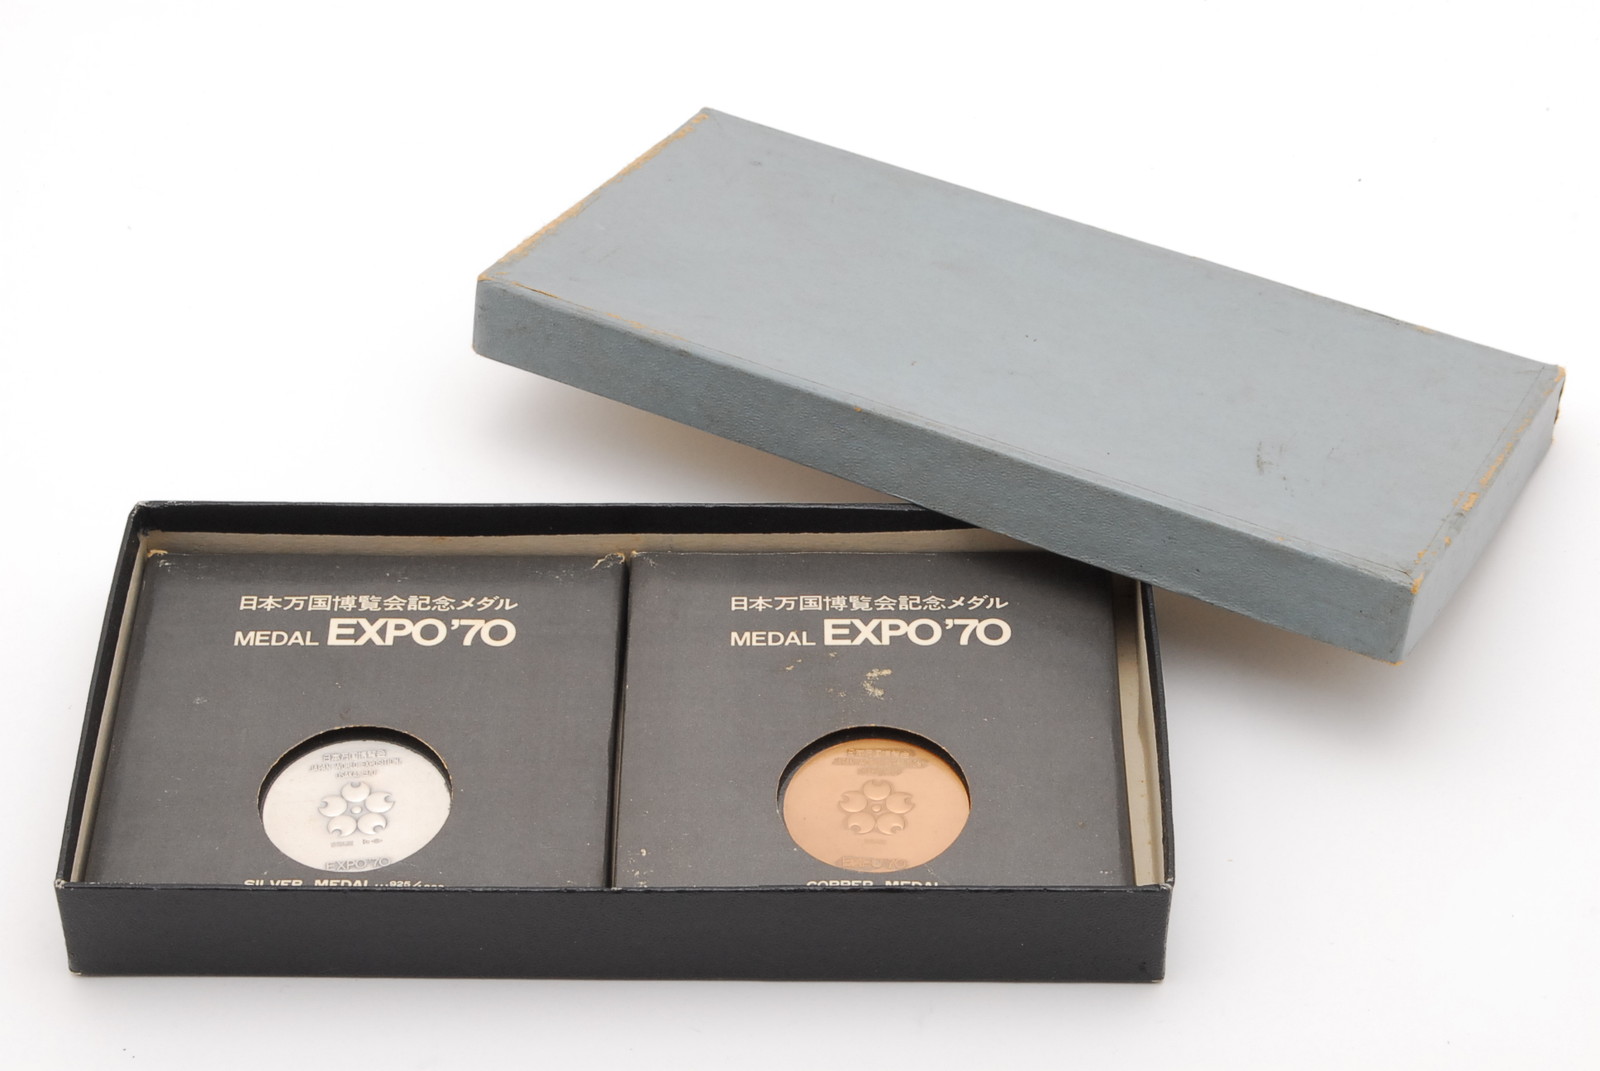 PROMOTION. MINT 1970 OSAKA JAPAN EXPO ’70 Silver and Copper Medals, Box, Case from Japan